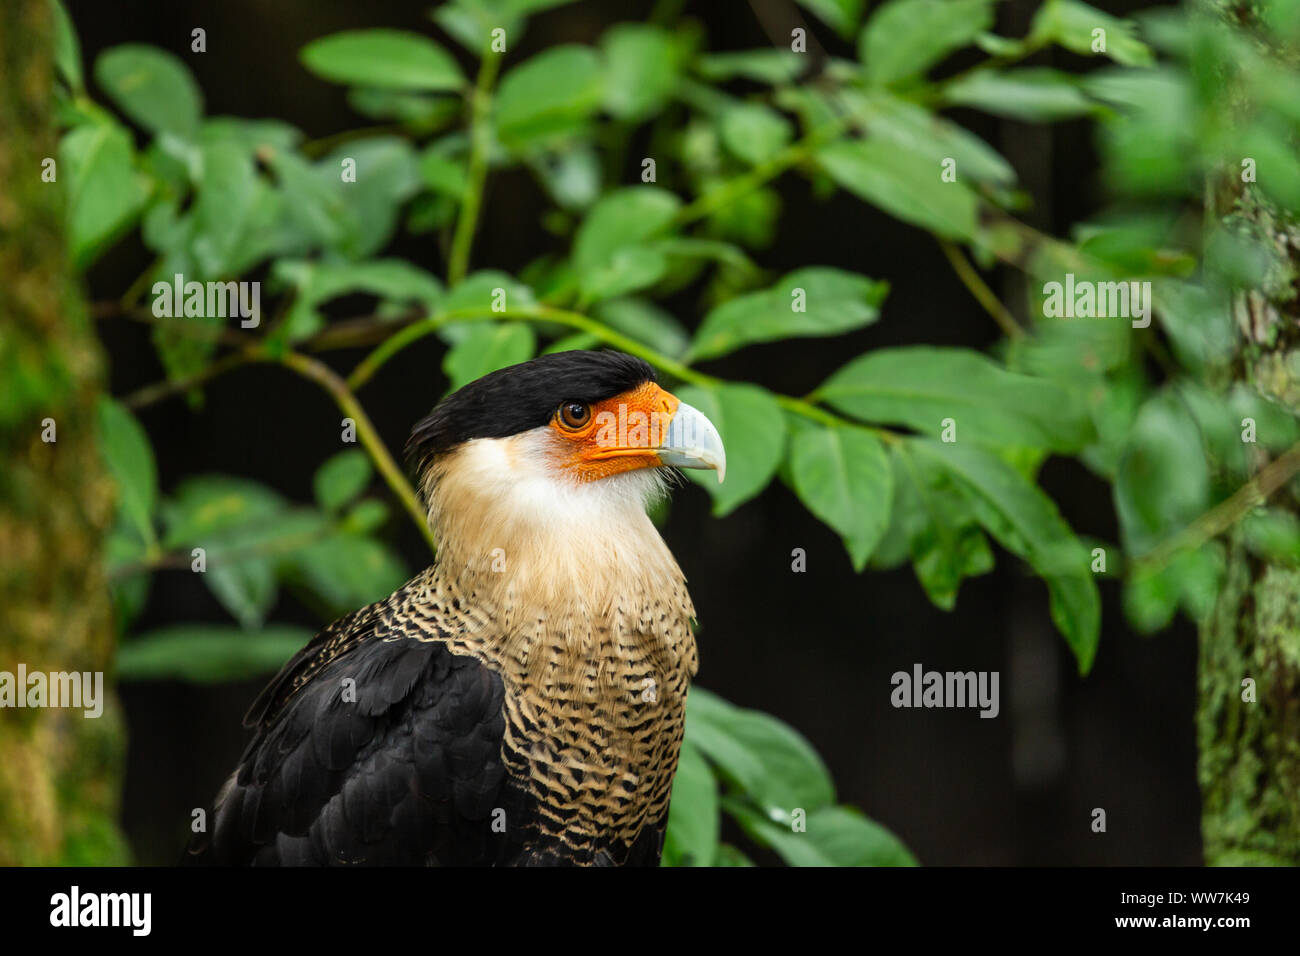 Portrait of a Northern Crested Caracara (Caracara cheriway) at the Ellie Schiller Homosassa Springs Wildlife State Park, Florida, USA. Stock Photo